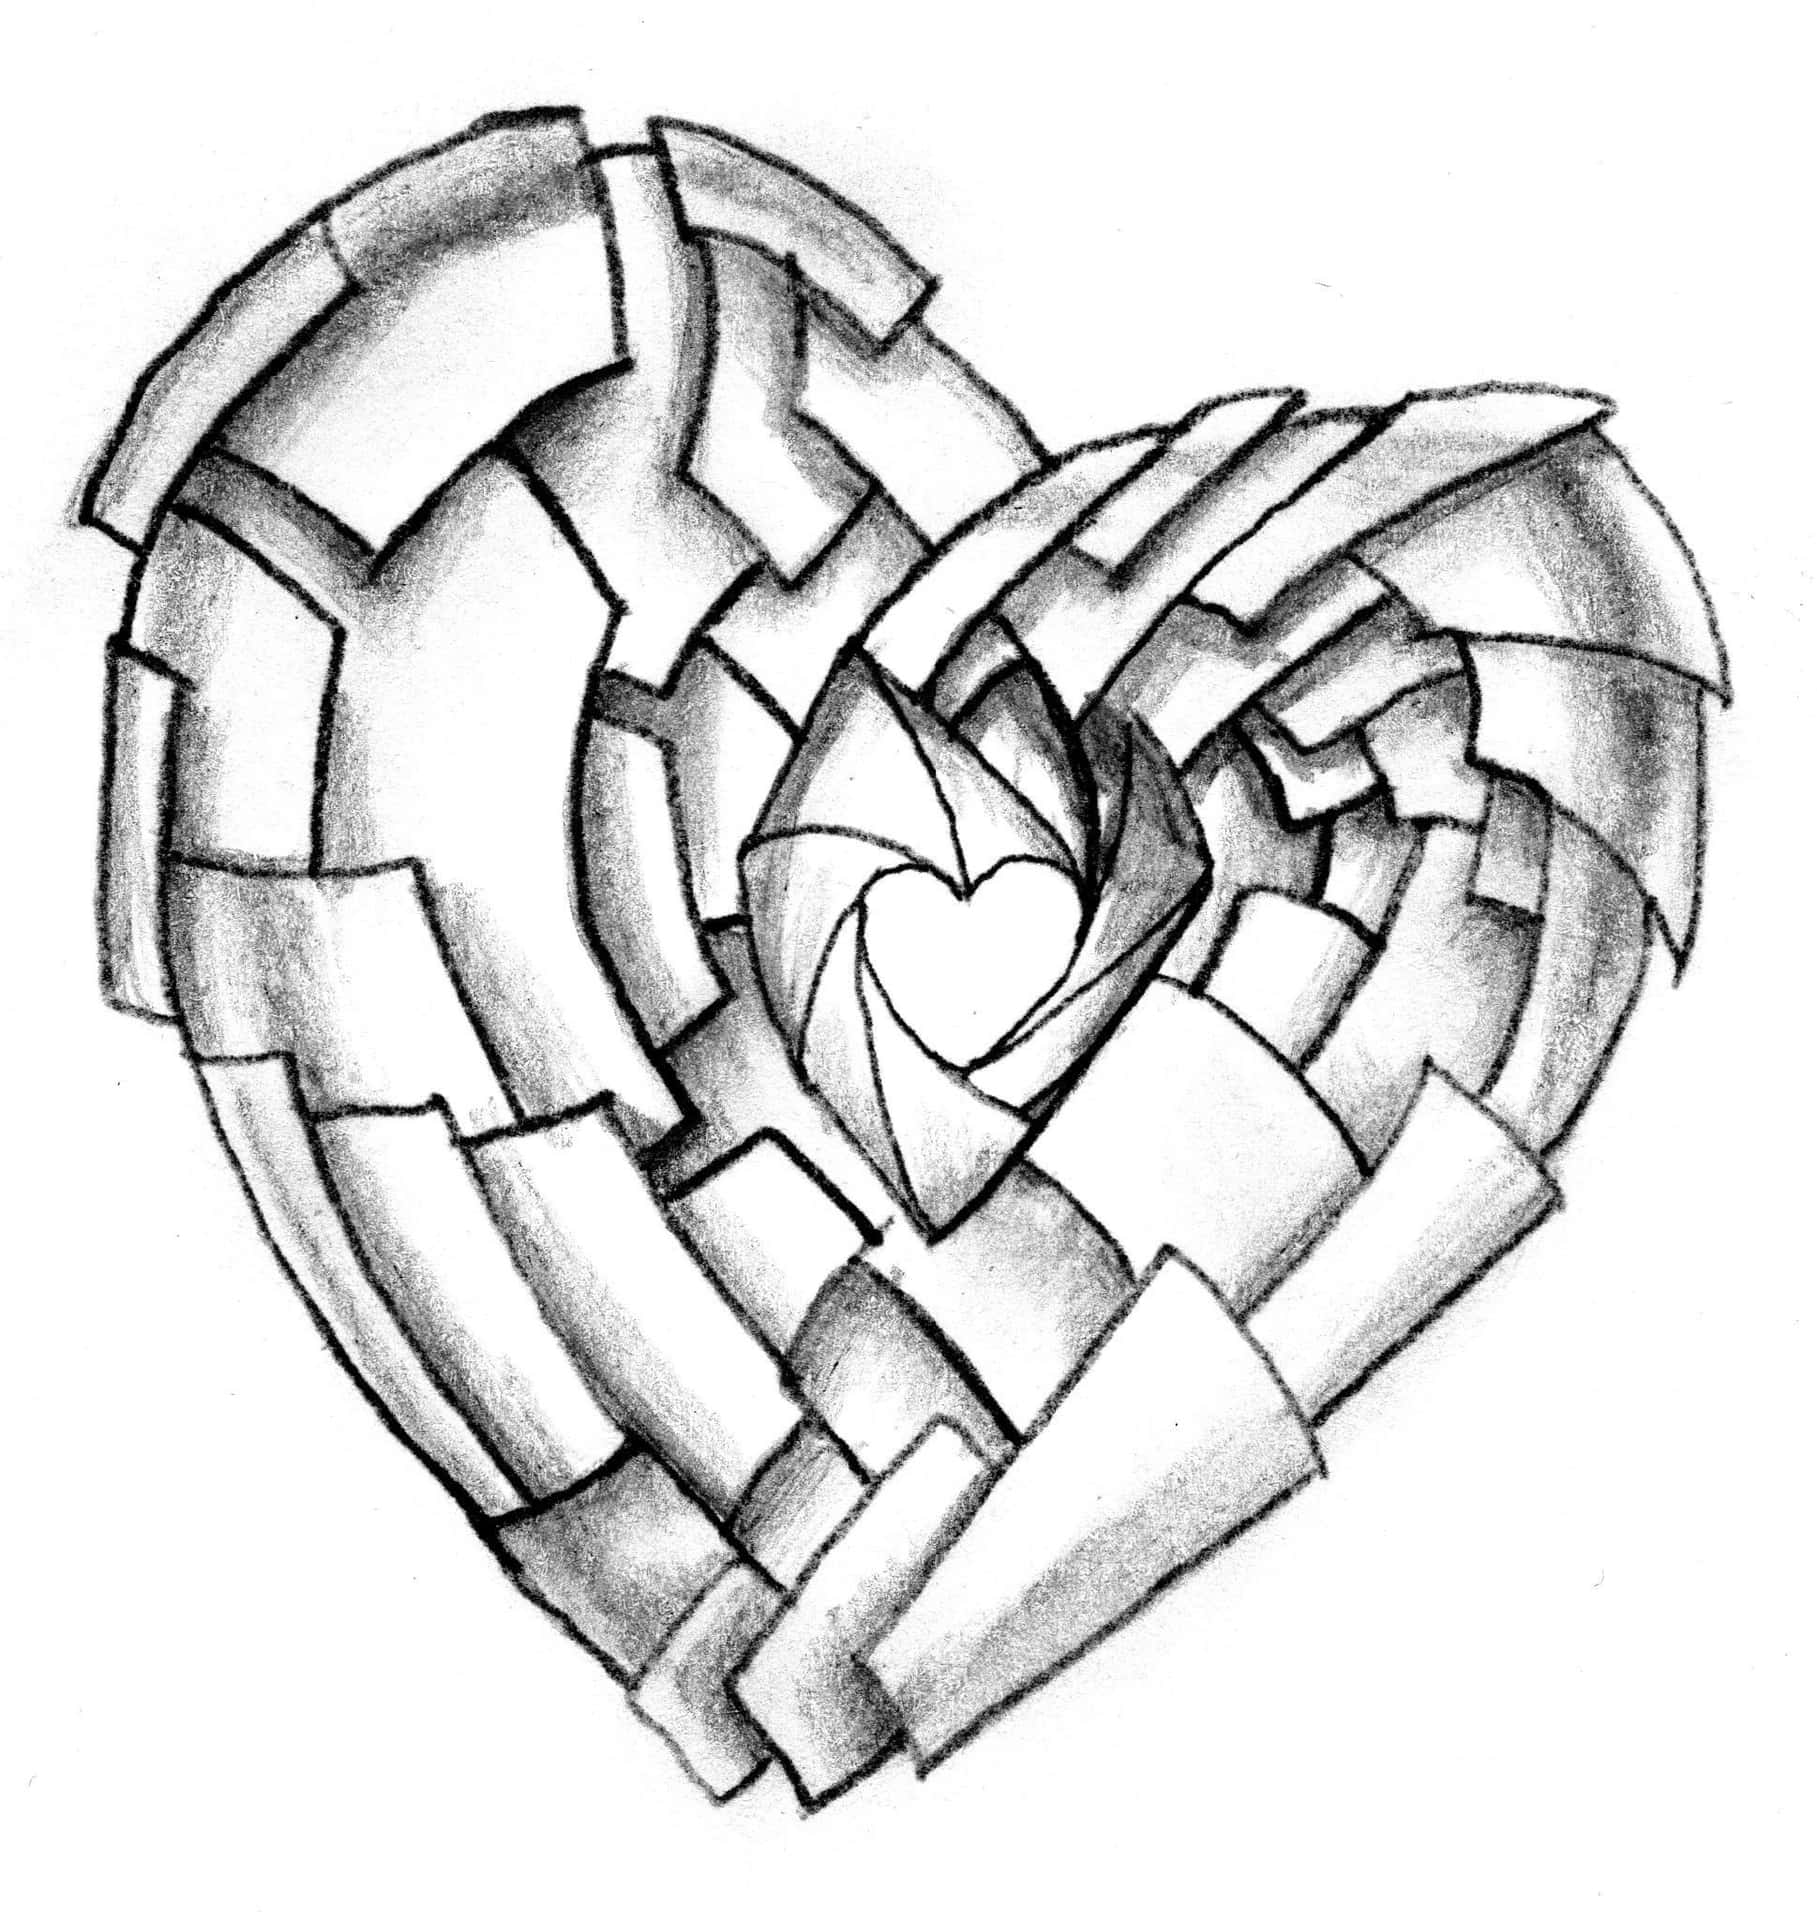 A Heart Made Of Paper Is Shown In The Drawing